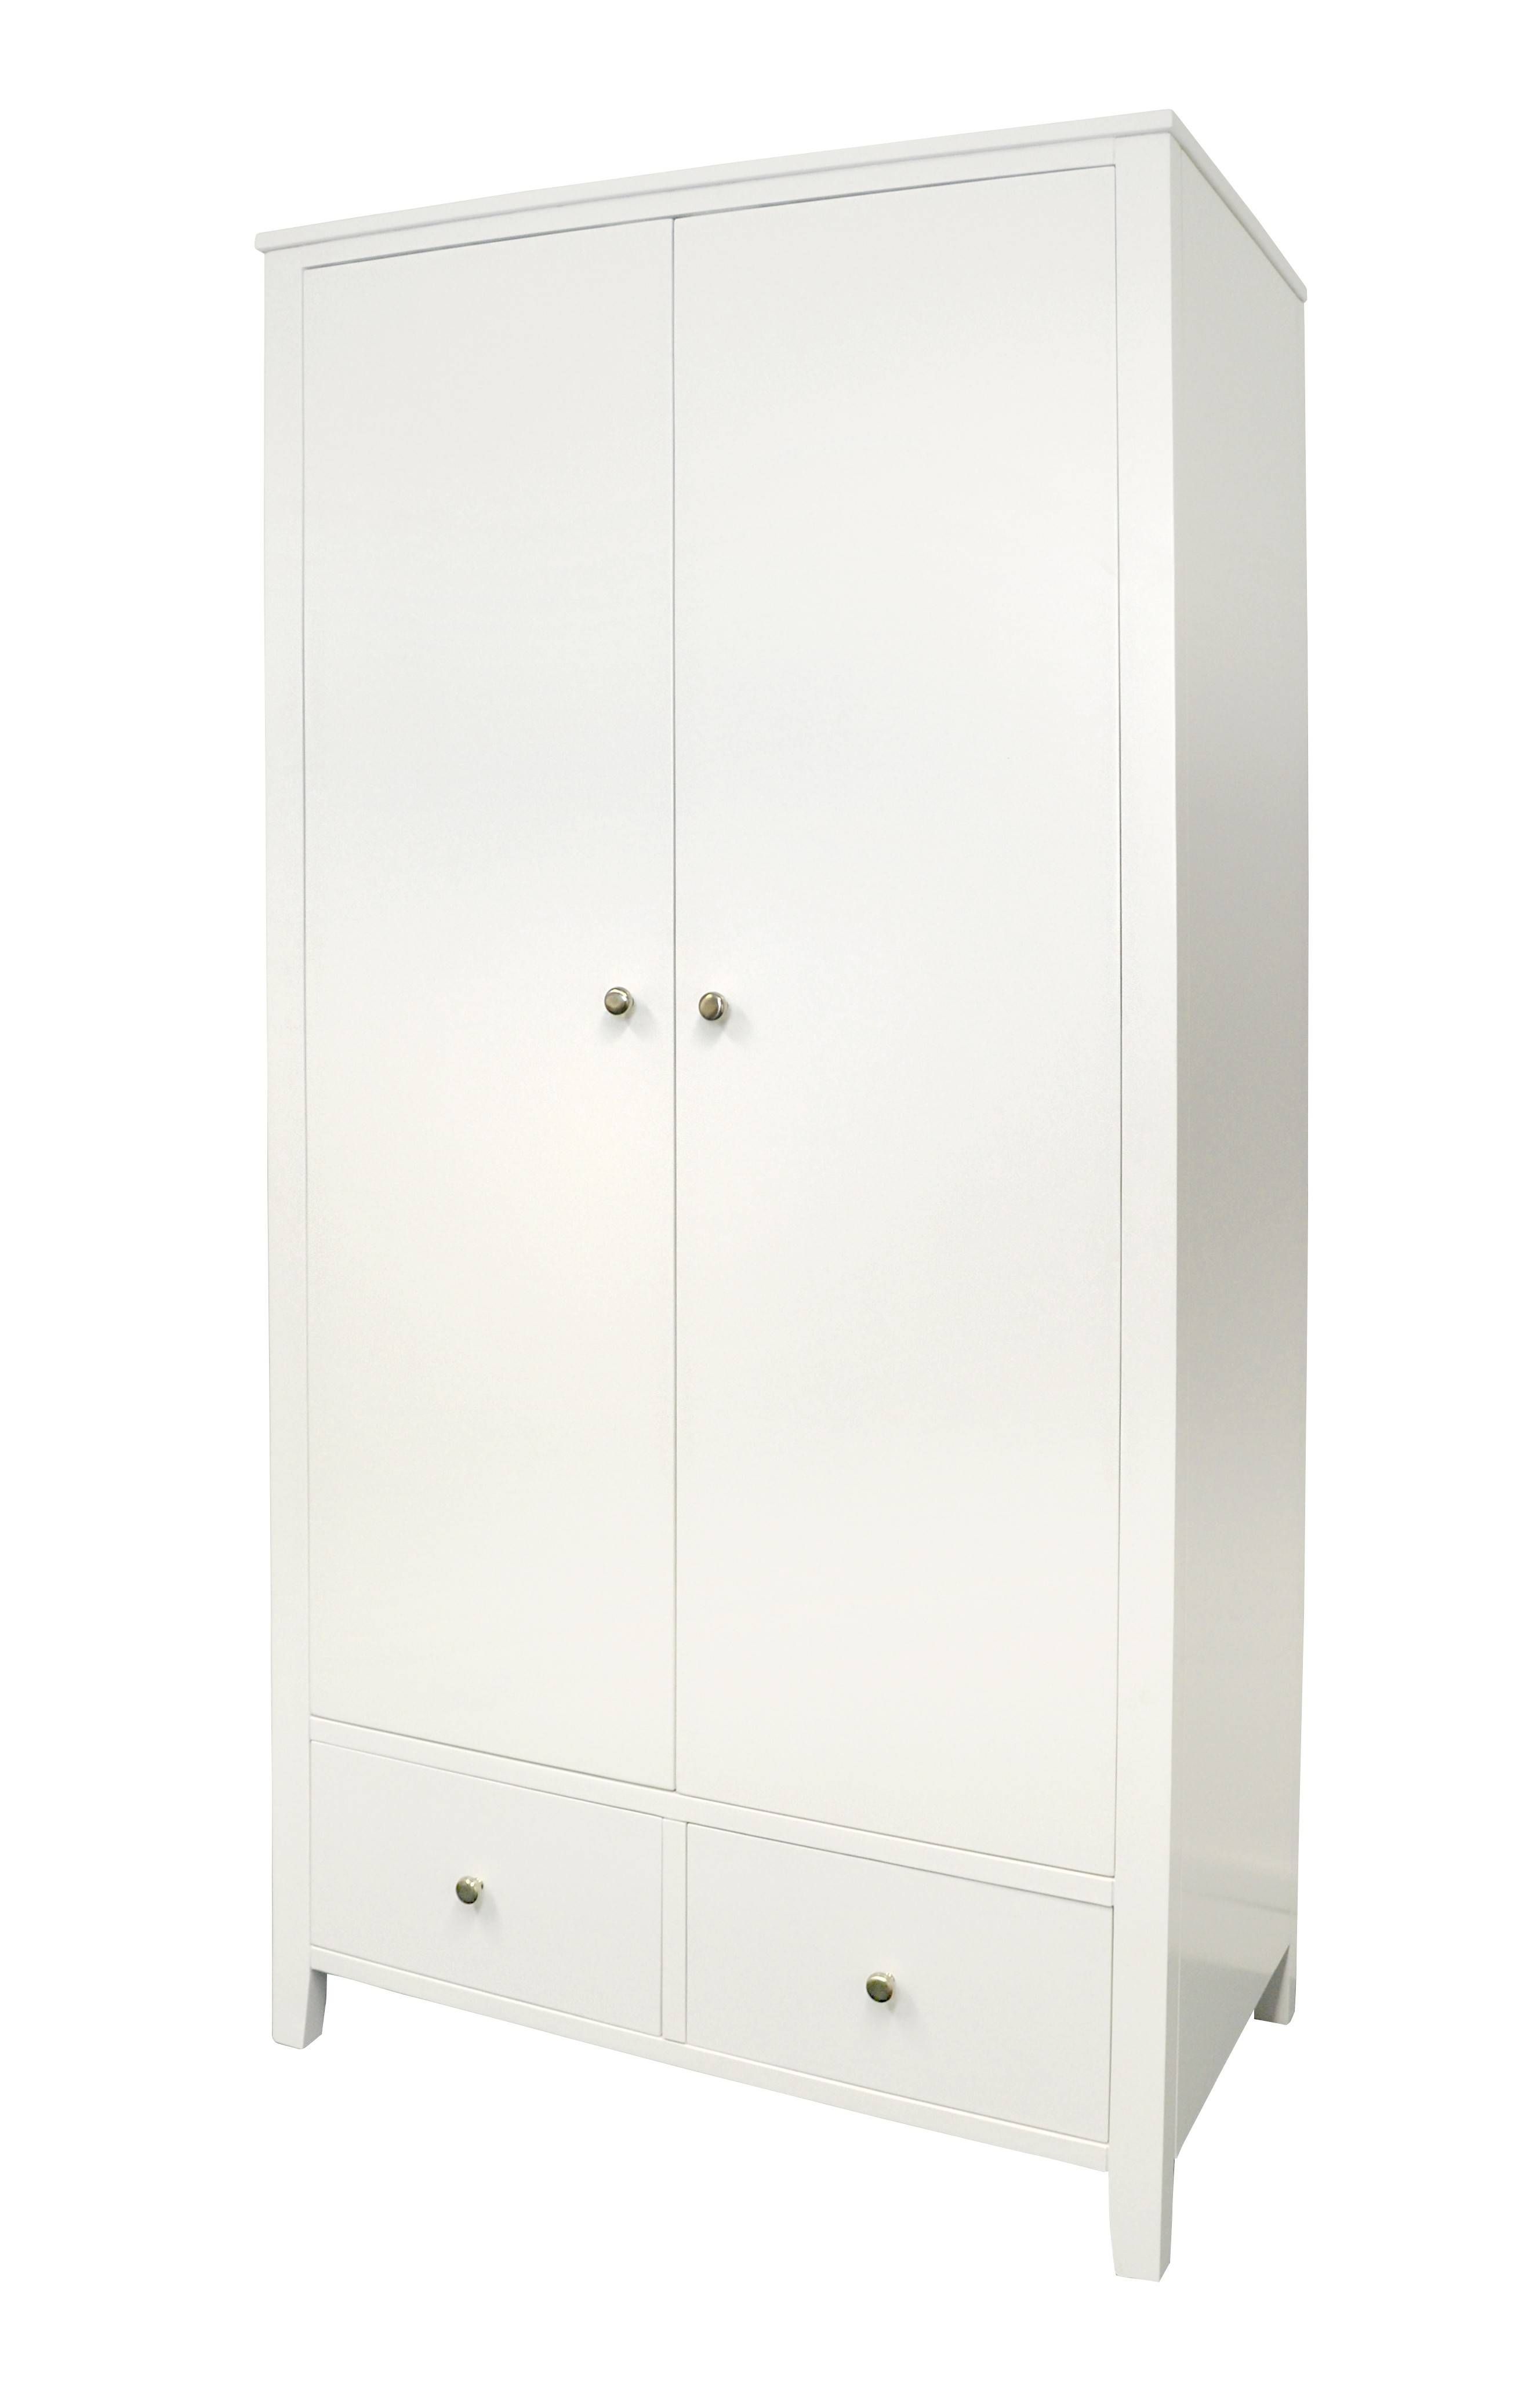 Brooklyn White Double Wardrobe With 2 Drawers| Bedroom Furniture Throughout White Double Wardrobes (View 4 of 15)